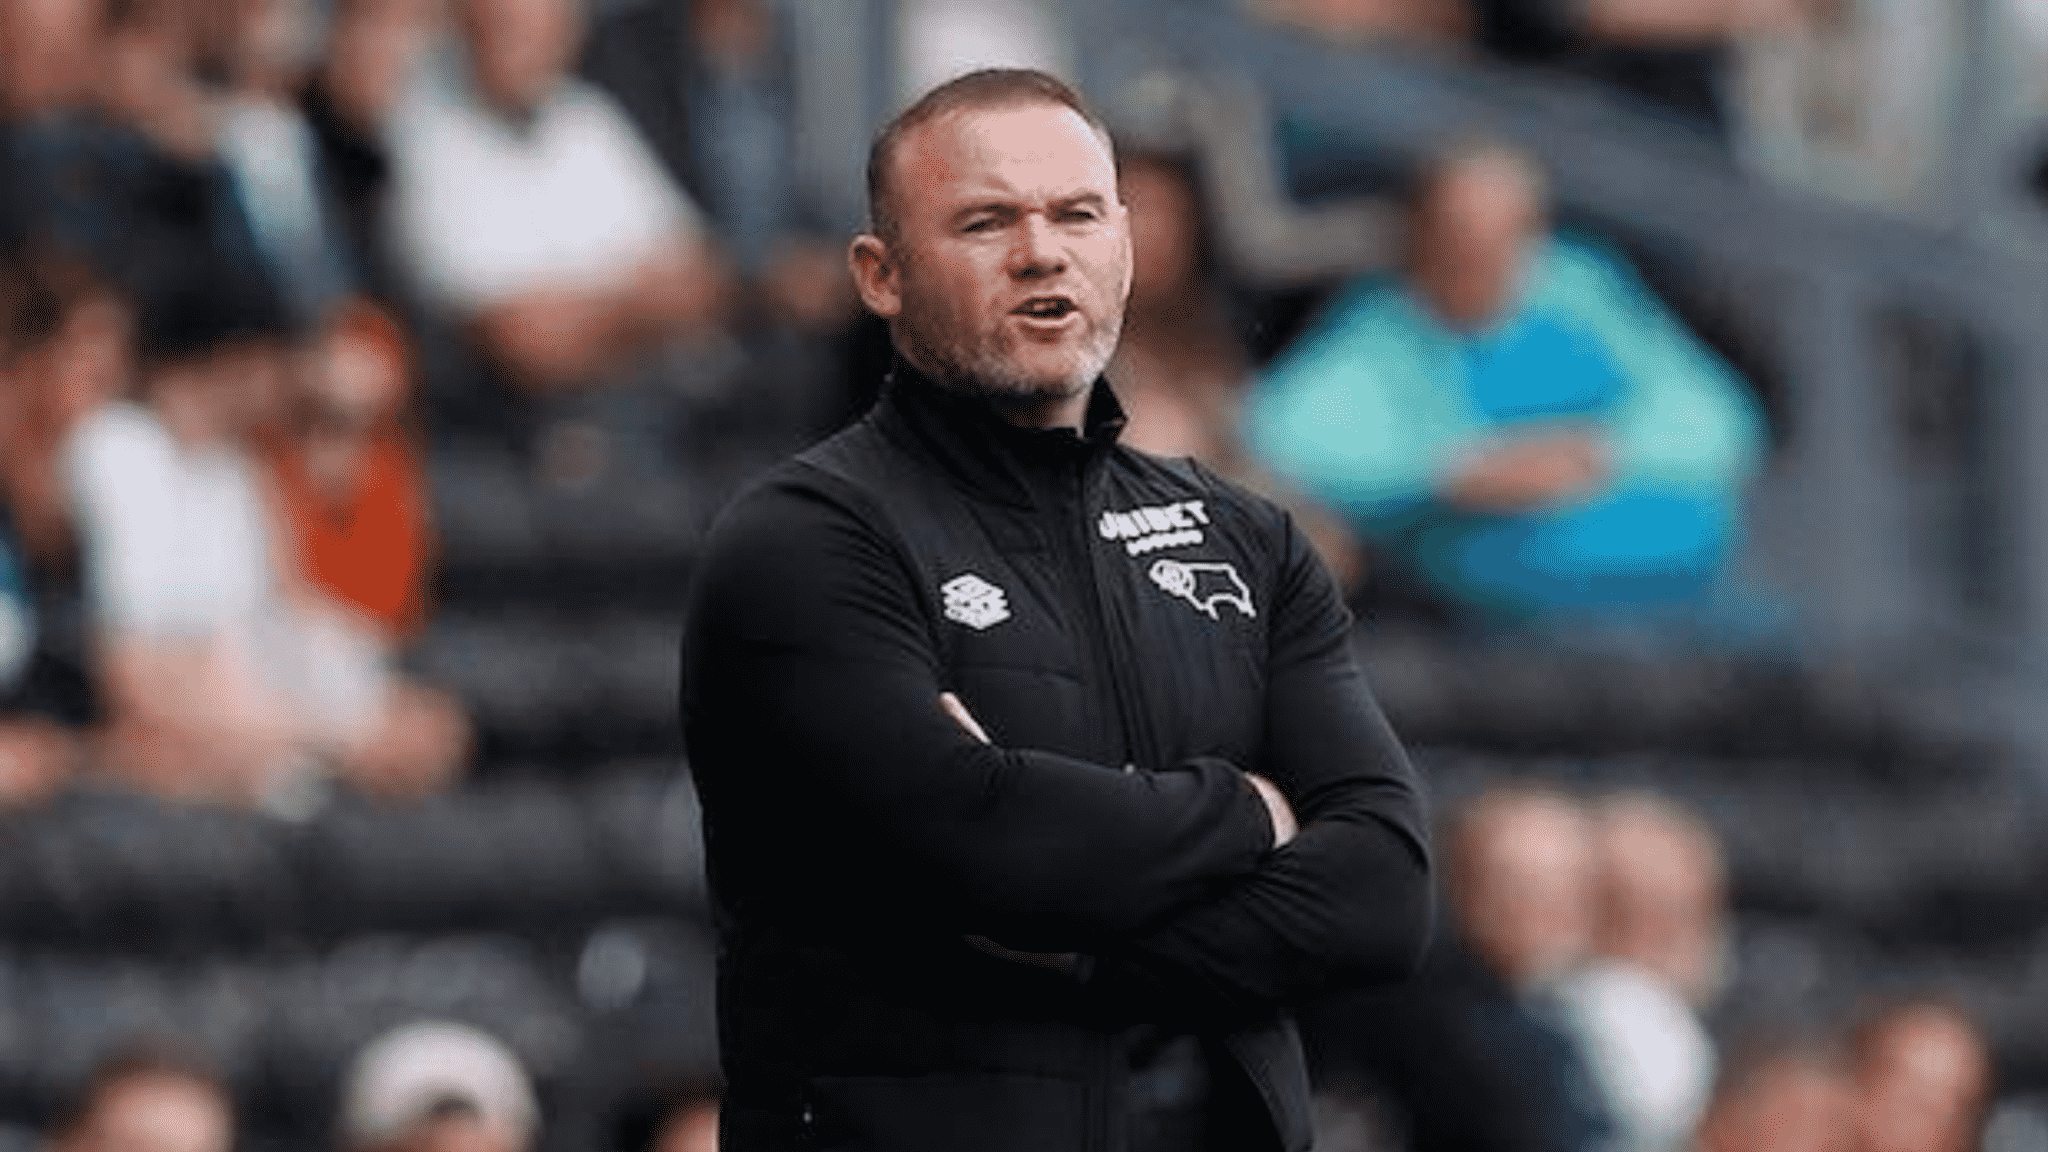 Rooney and Derby County relegated to English third tier following 21 points deduction, My Football Facts